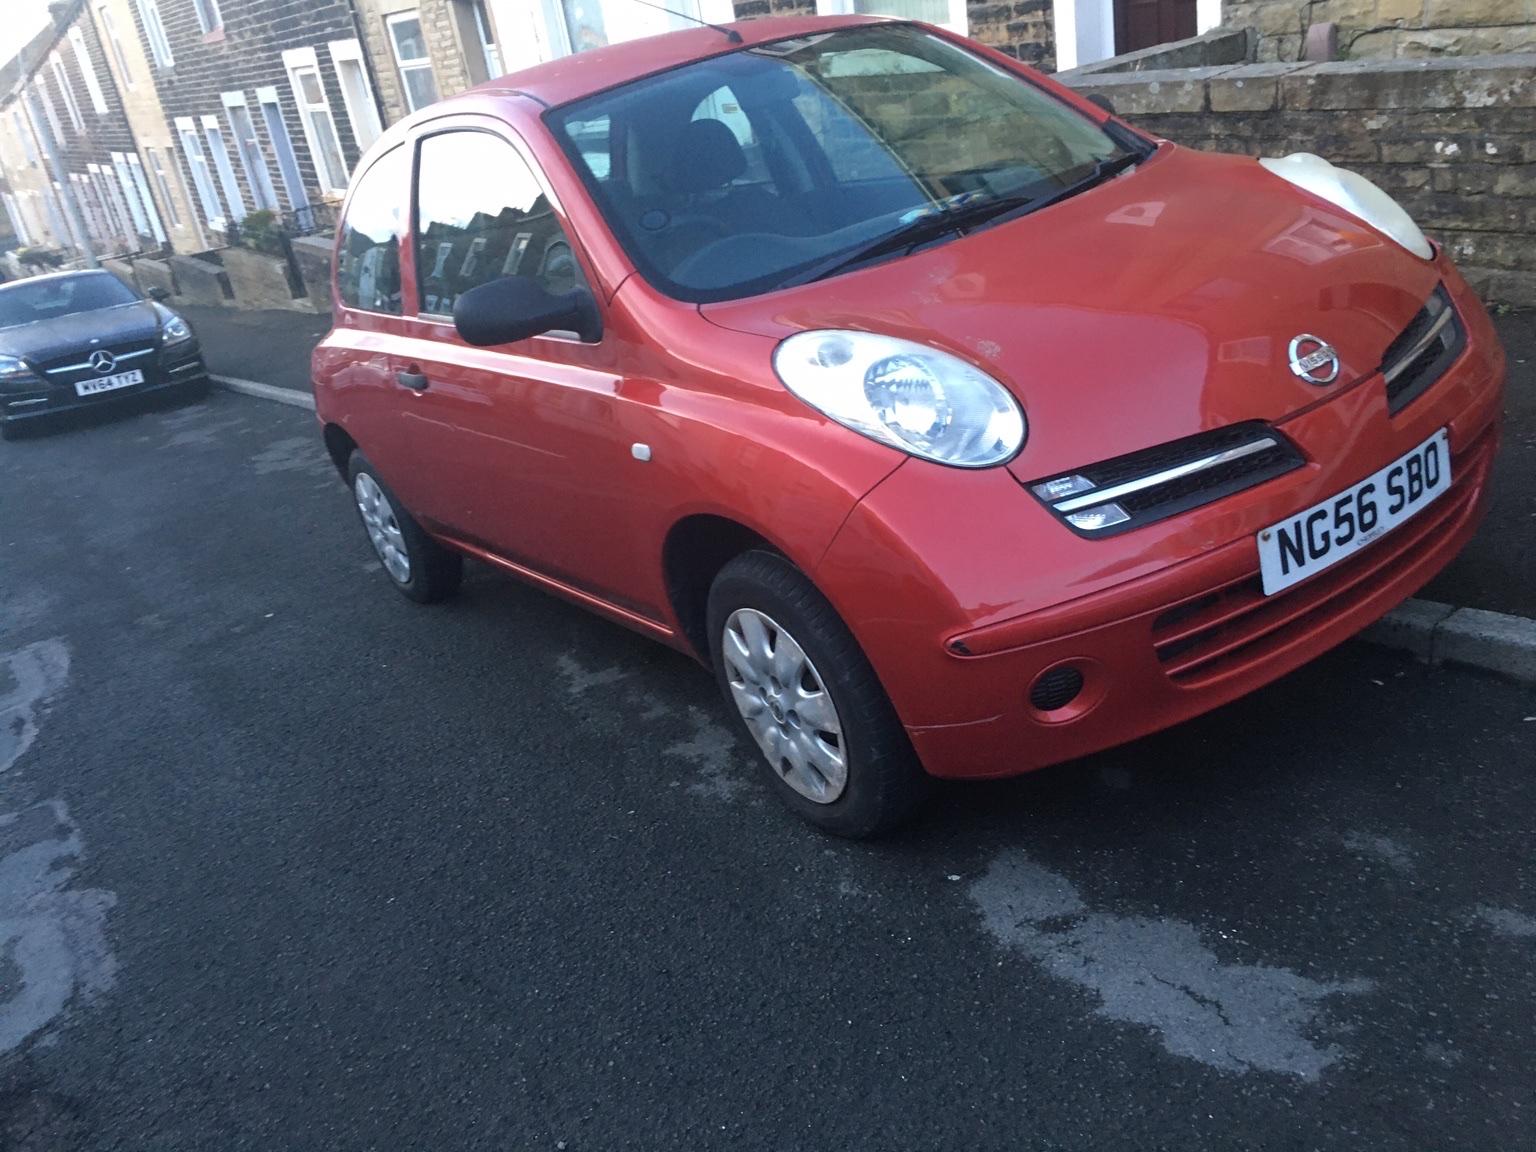 85k Nissan micra 1.2 petrol 2006 red in BB9 Pendle for £